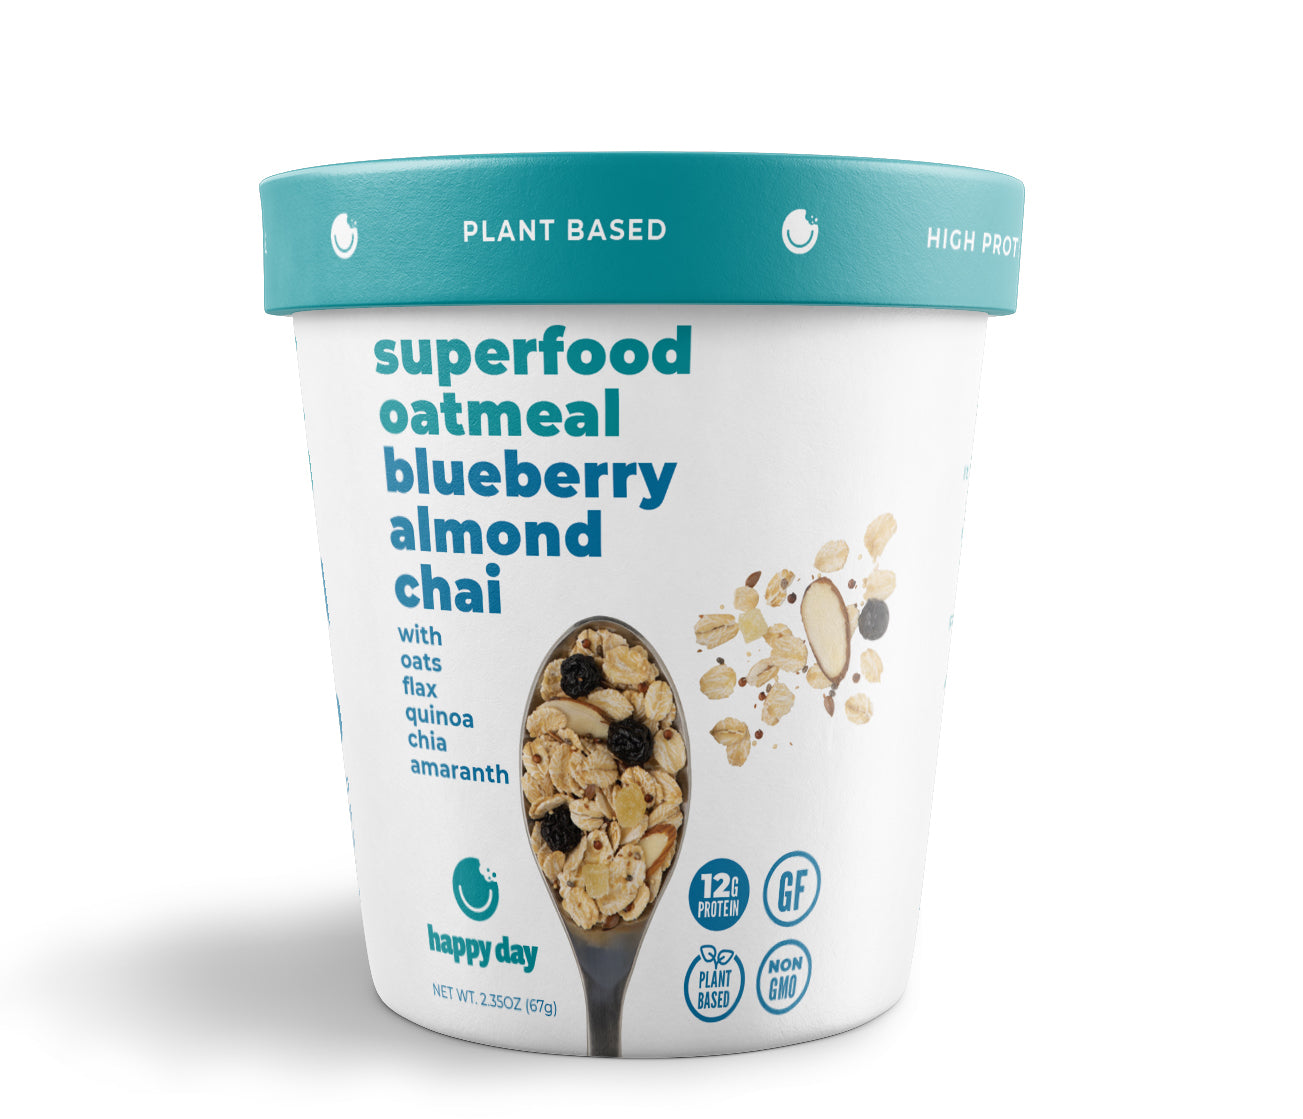 Superfood Oatmeal Blueberry Almond Chai Cups - 12 Pack